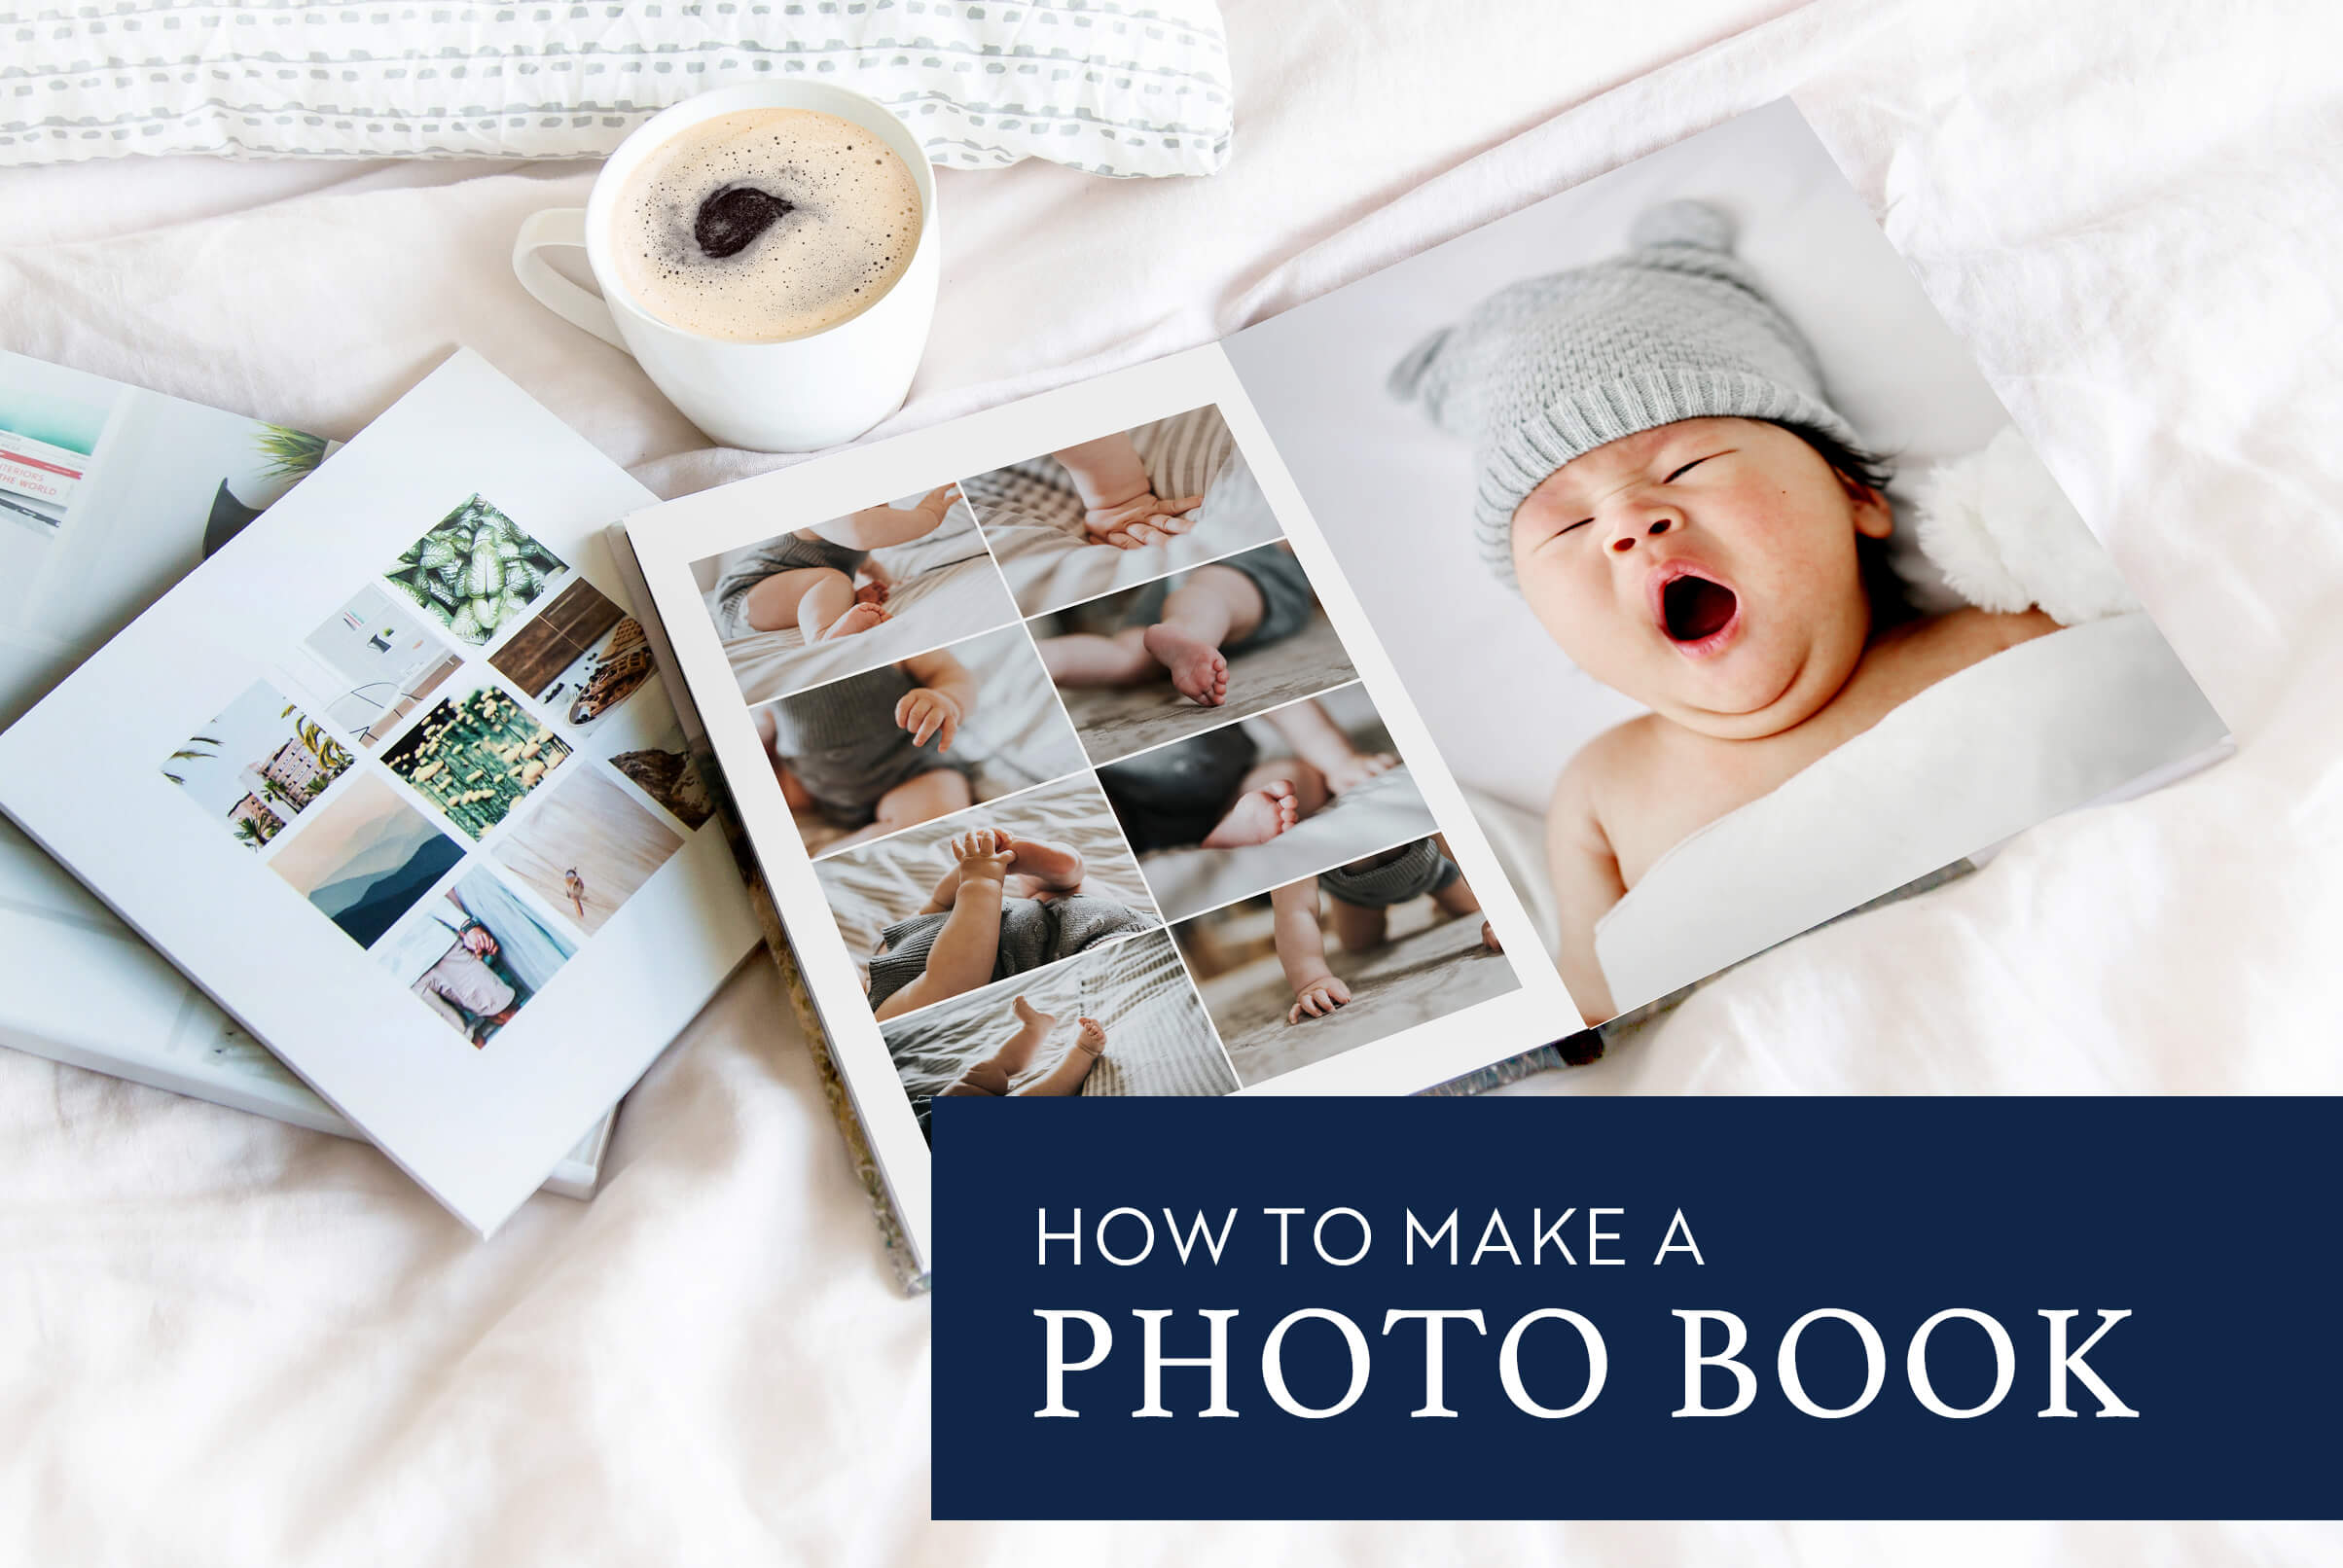 How to make a photo book